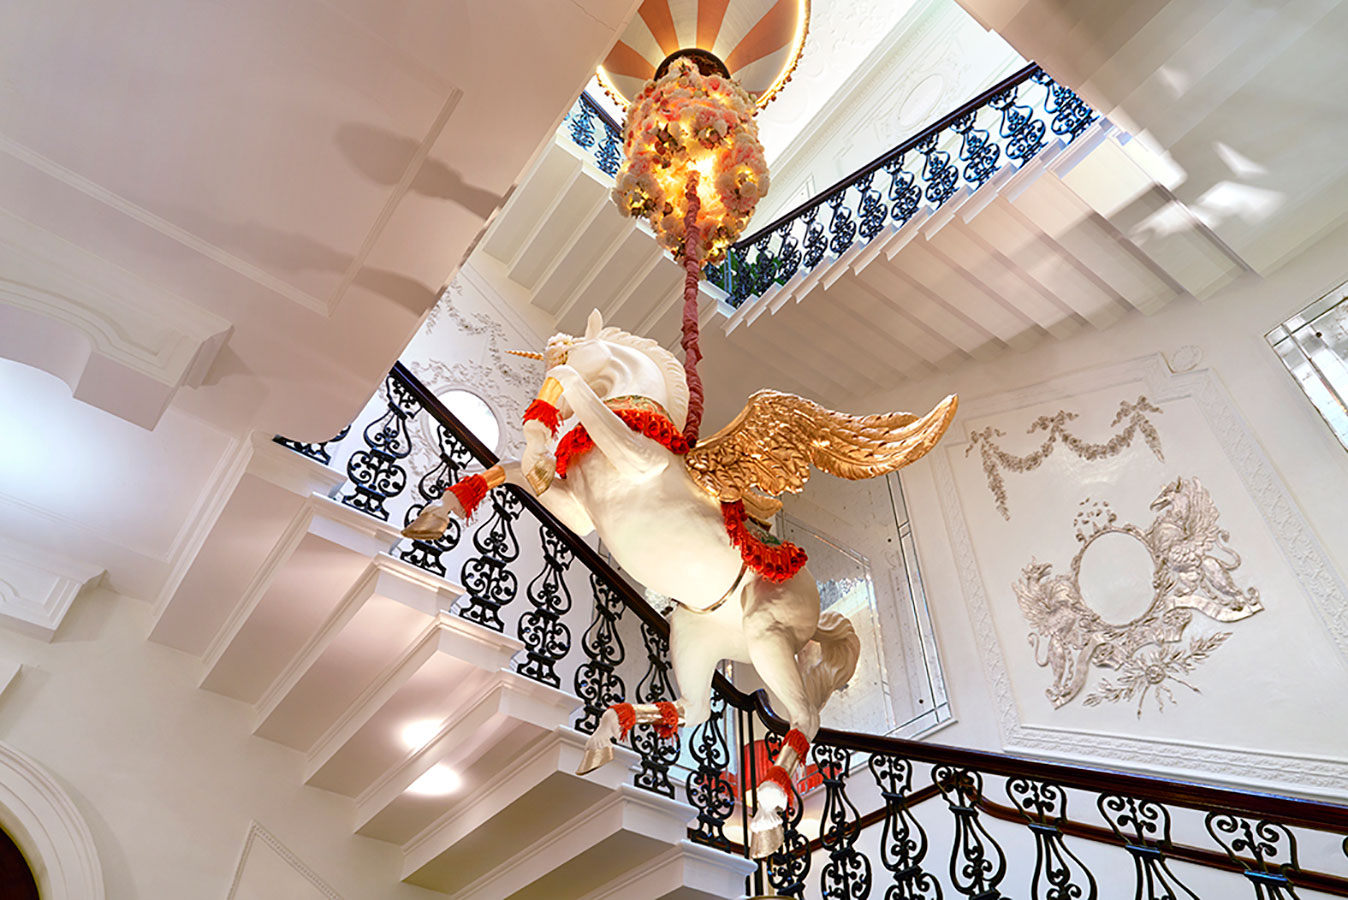 Unicorn on the staircase at Annabels